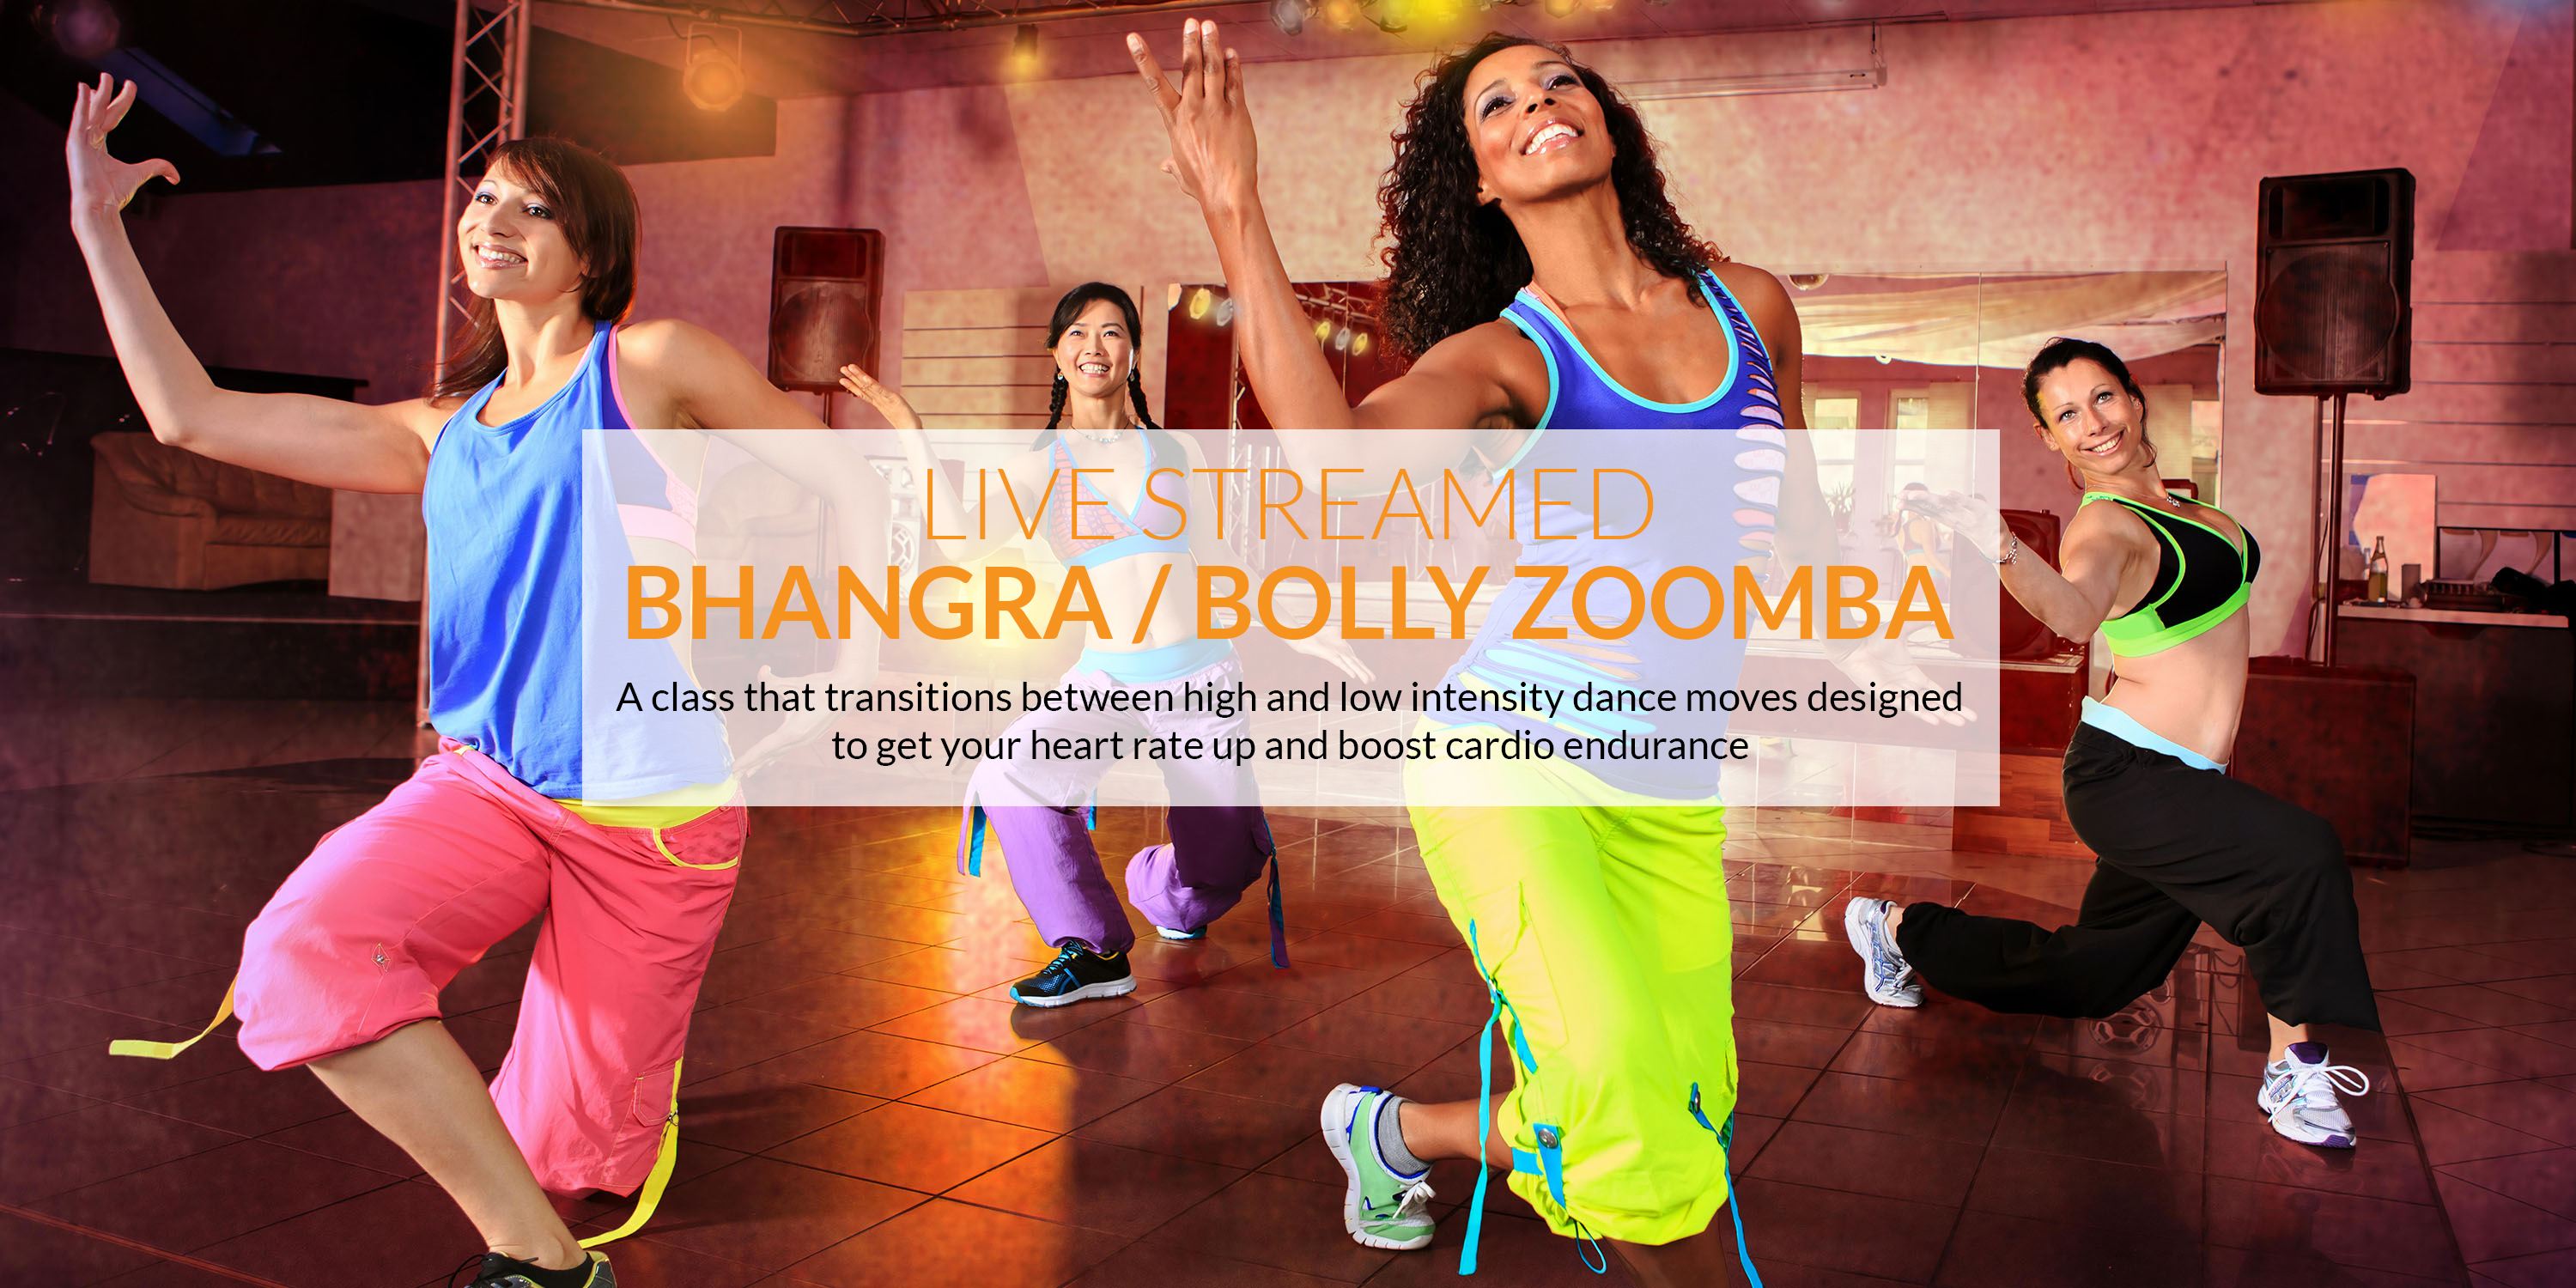 The best Bhangra/Bolly ZOOMBA live-streamed